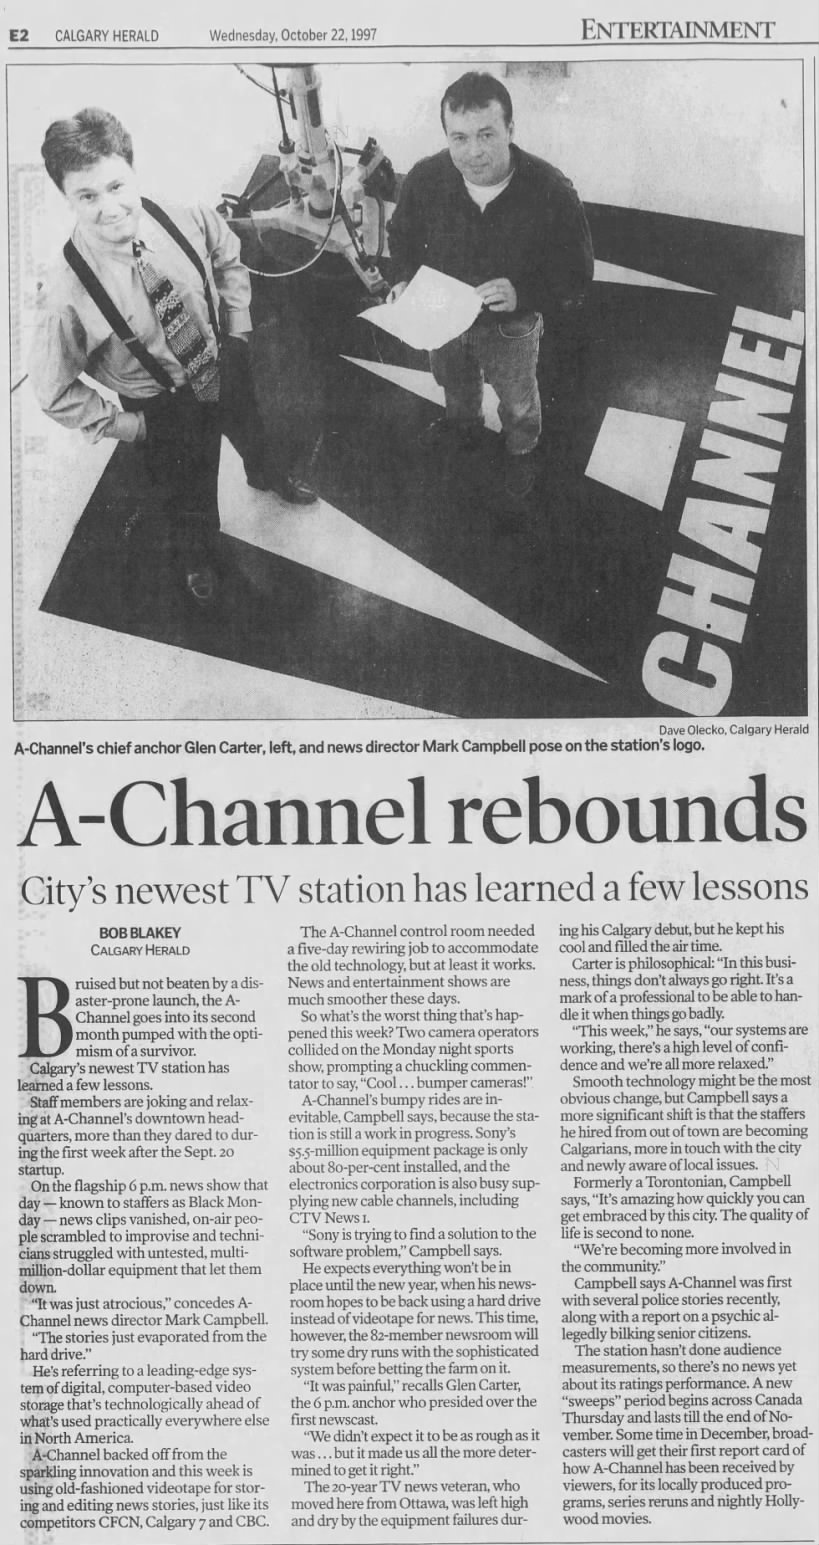 A-Channel rebounds: City's newest TV station has learned a few lessons